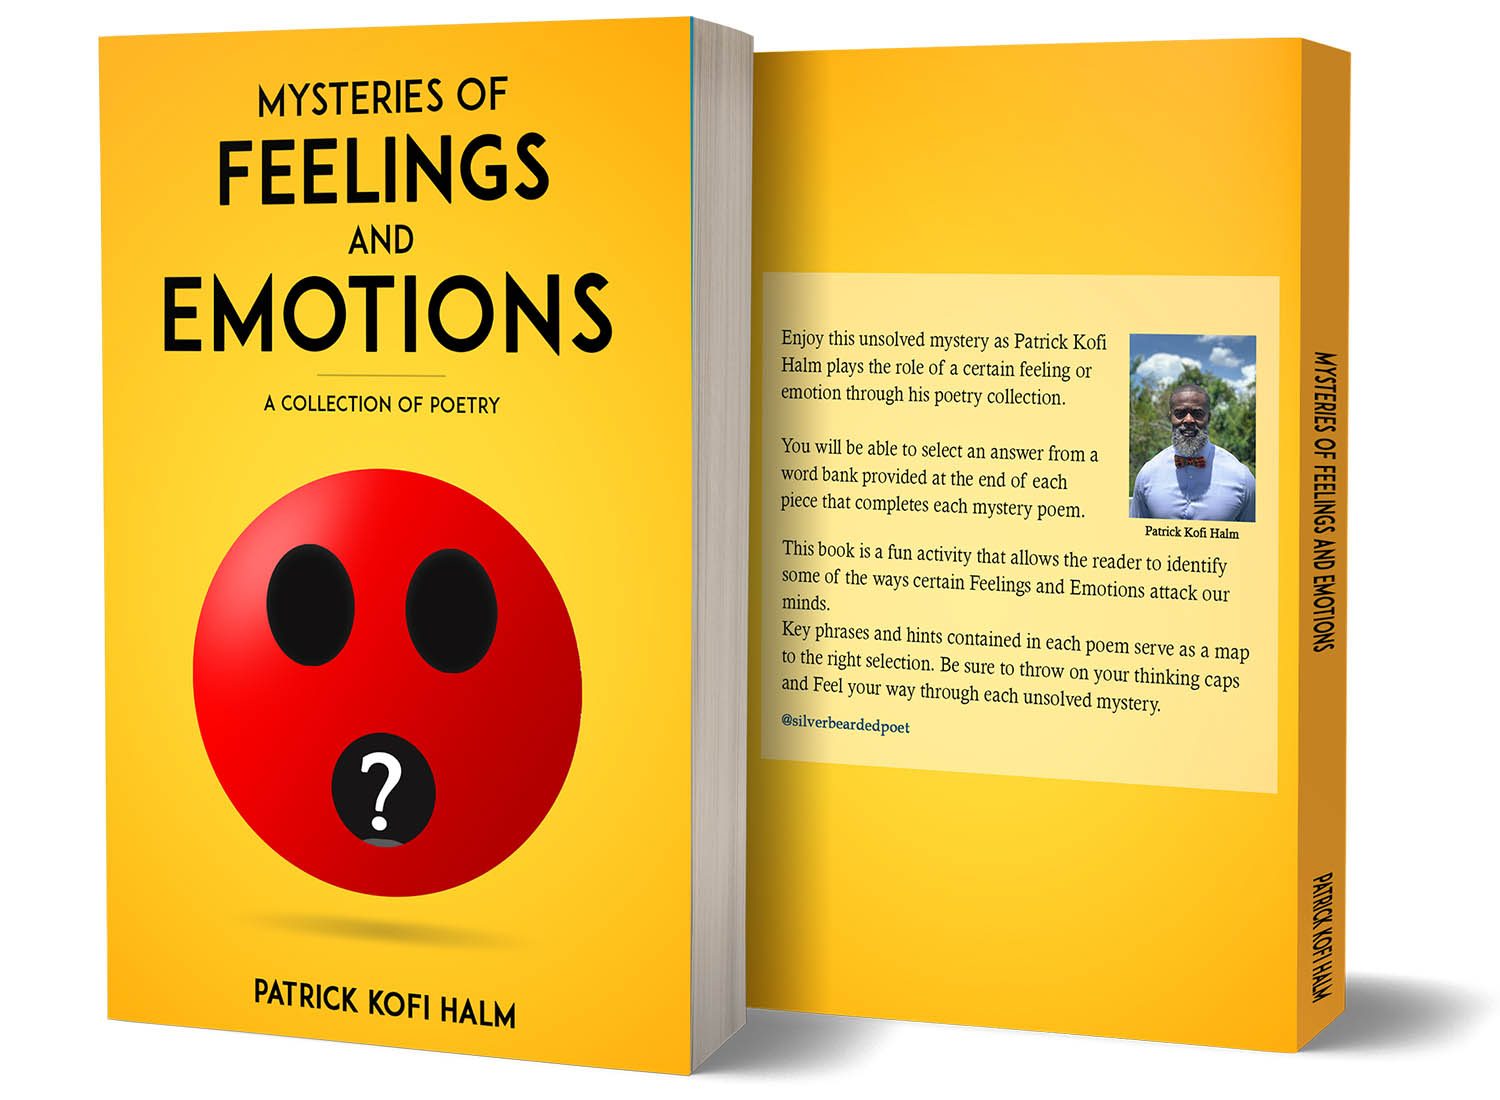 mrismailben-portfolio-MYSTERIES OF FEELINGS AND EMOTIONS-paperbackcover-bookckoverdesign